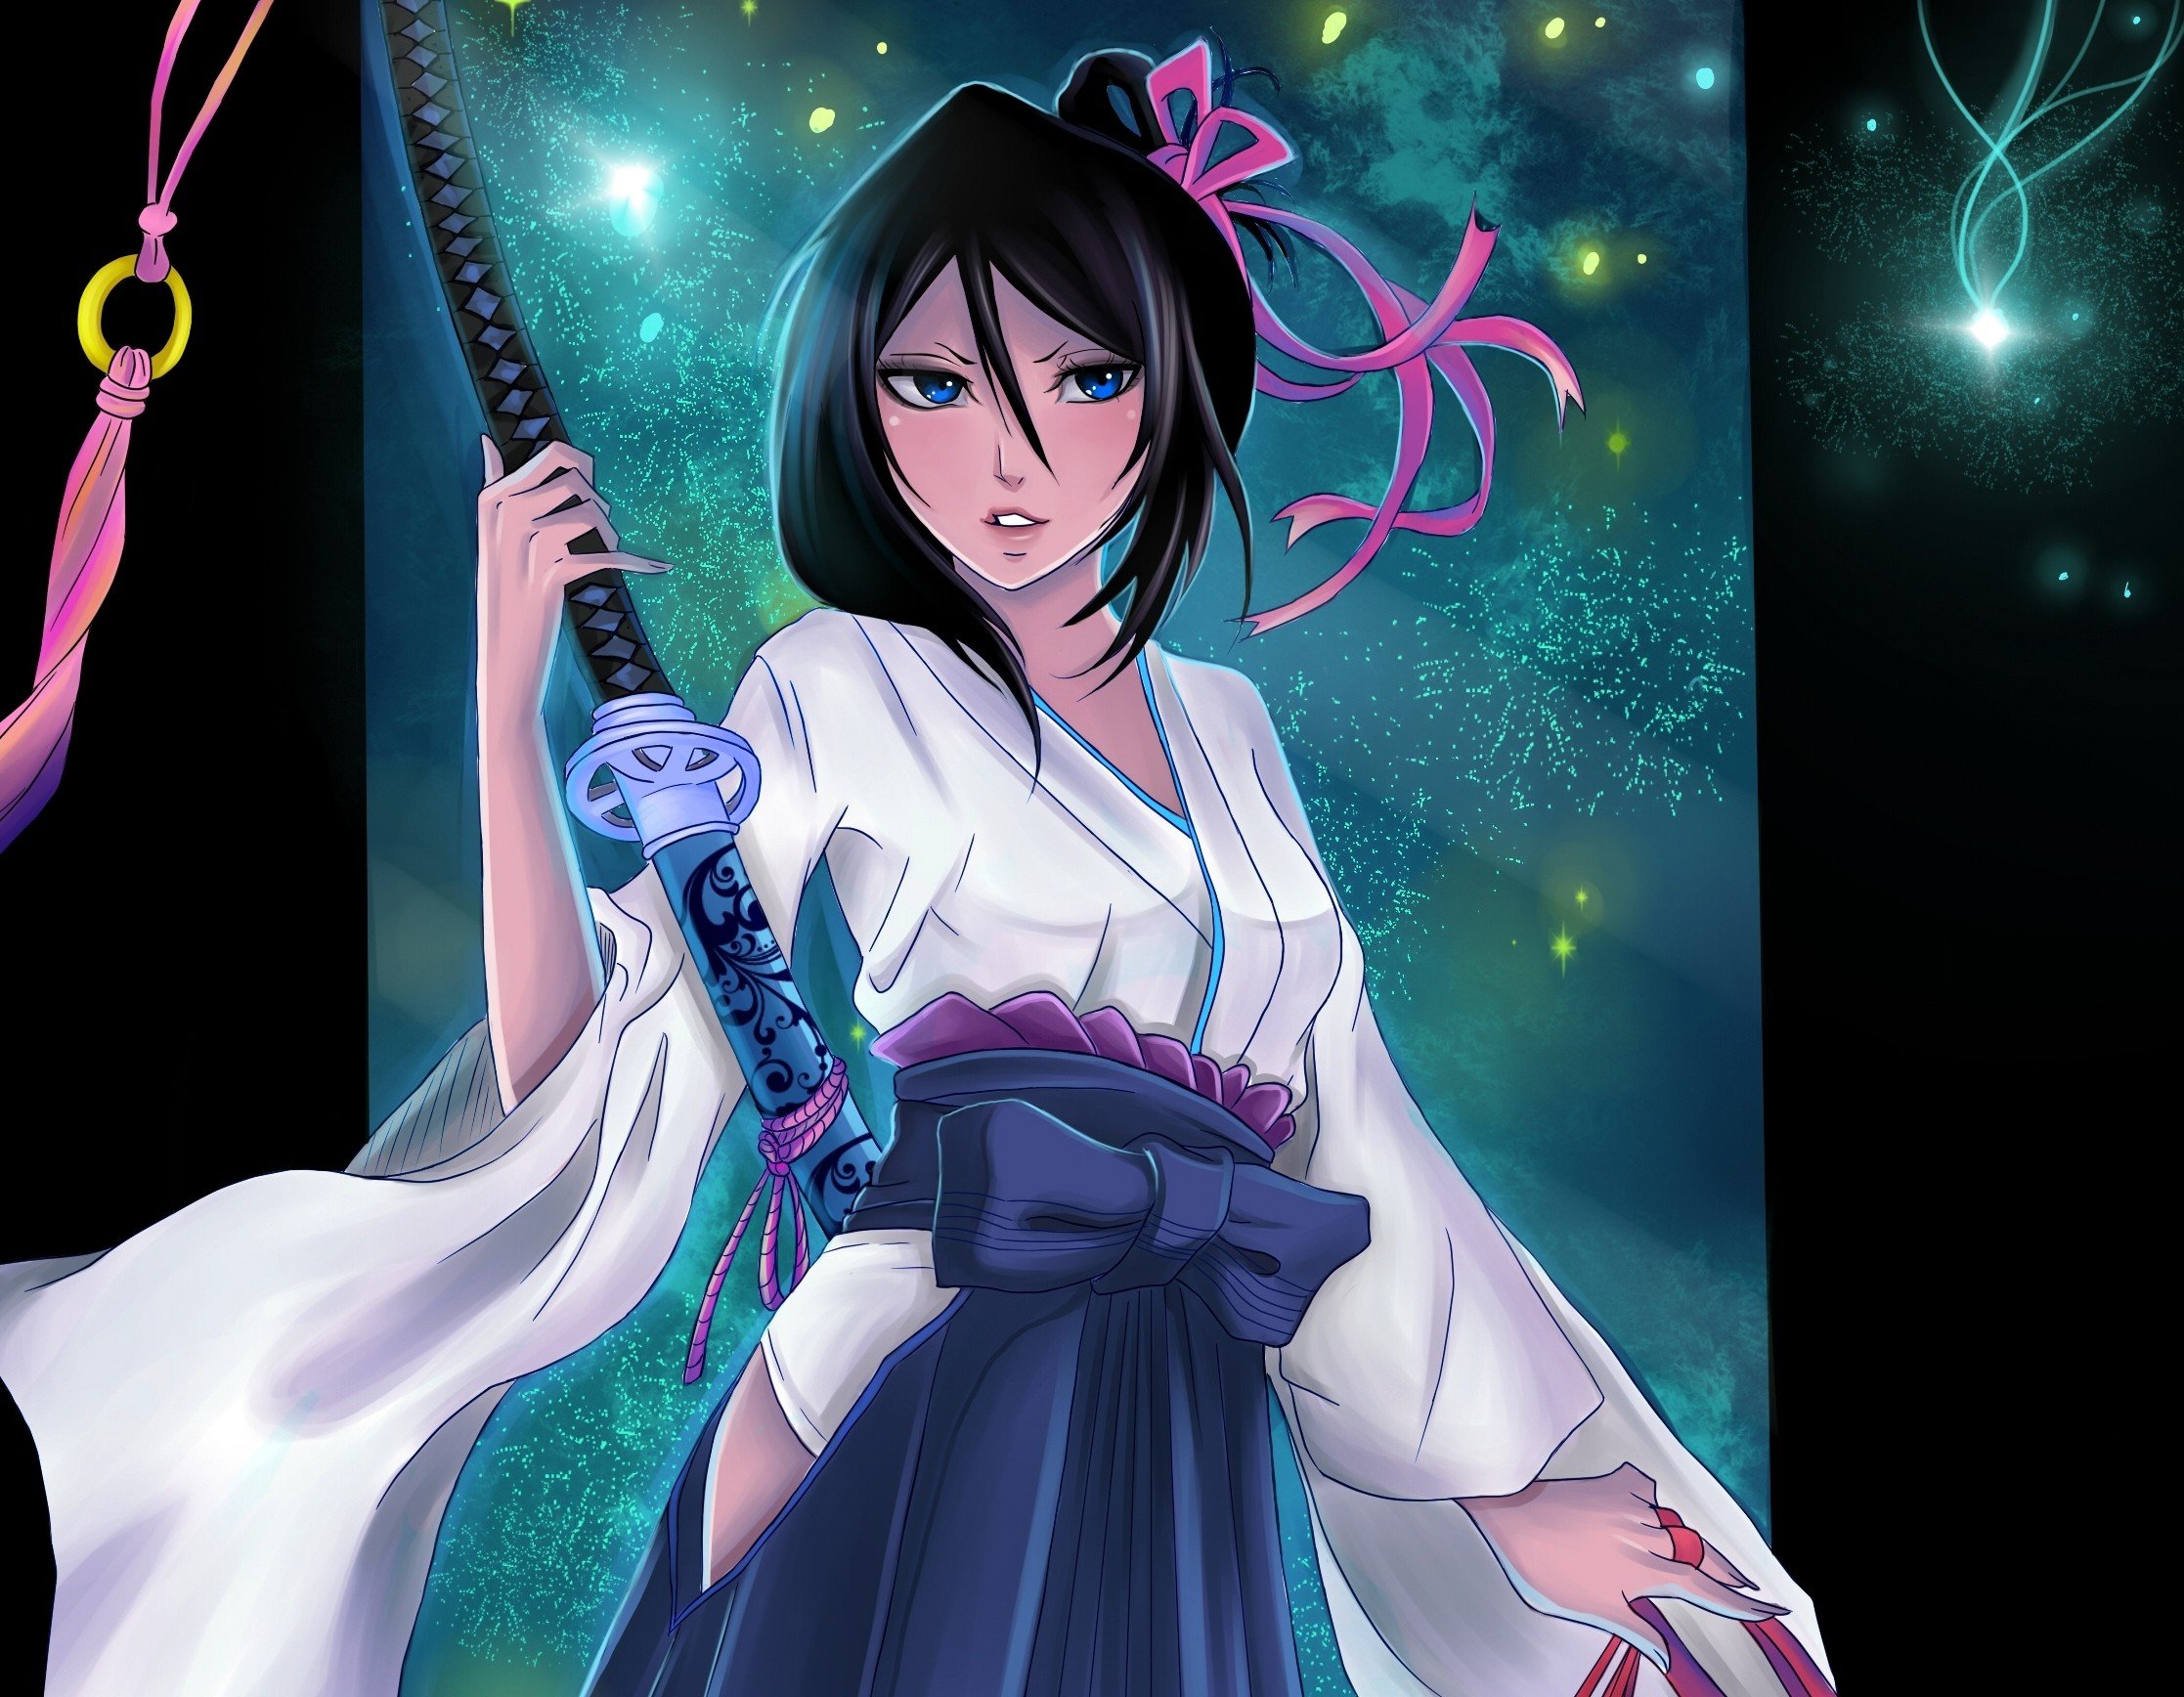 Download Bleach, Kuchiki Rukia, Anime vectors Wallpapers HD / Desktop and Mobile Backgrounds